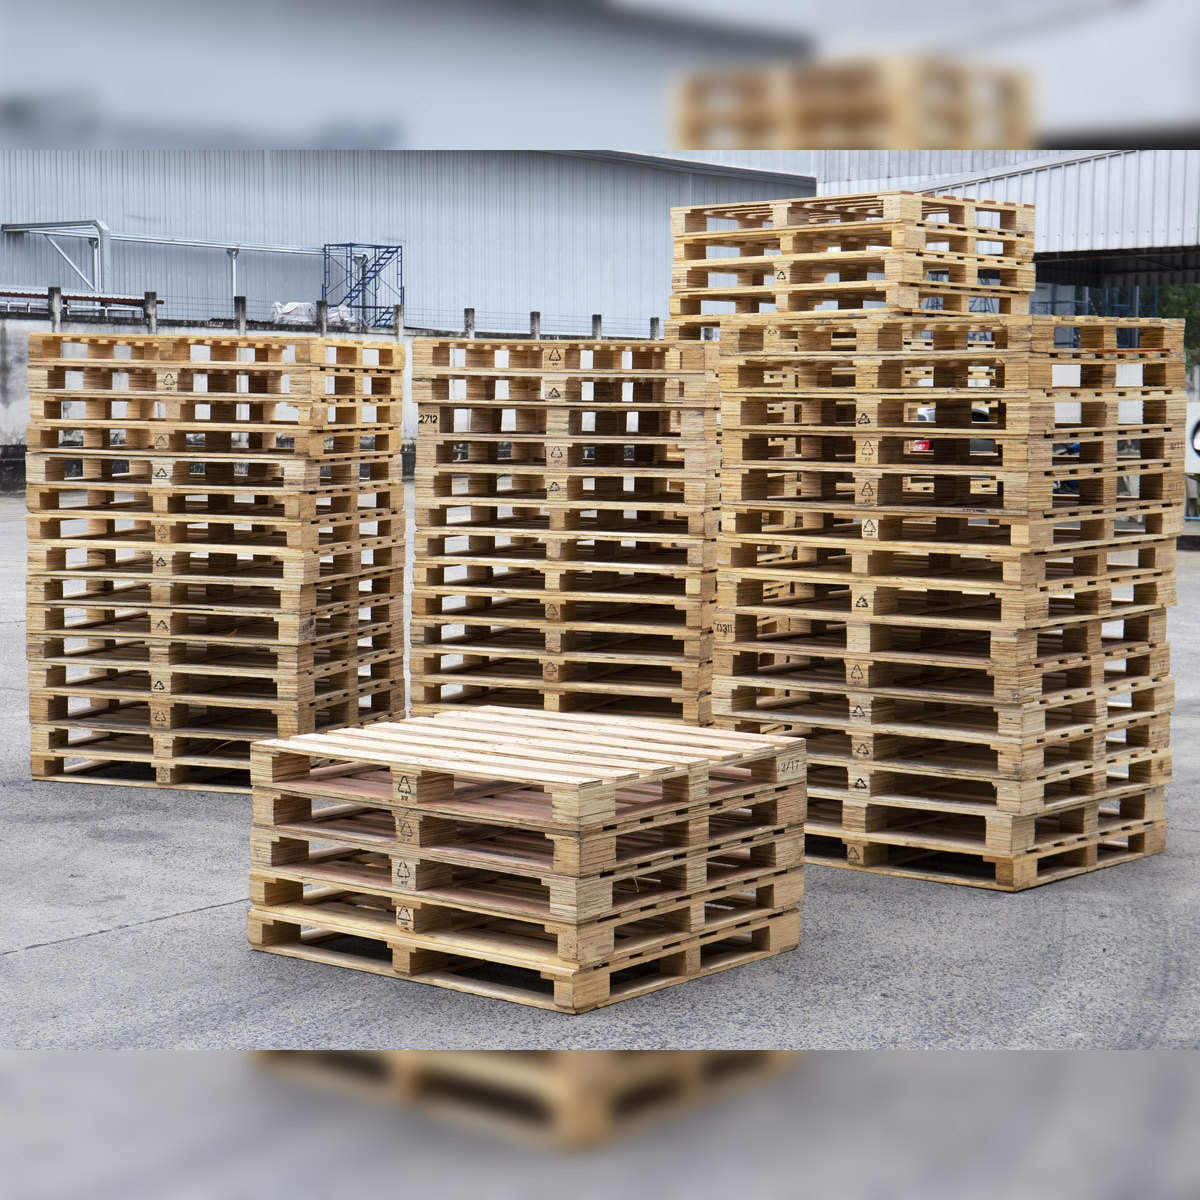 The Forgotten Shipping Pallet Stages A